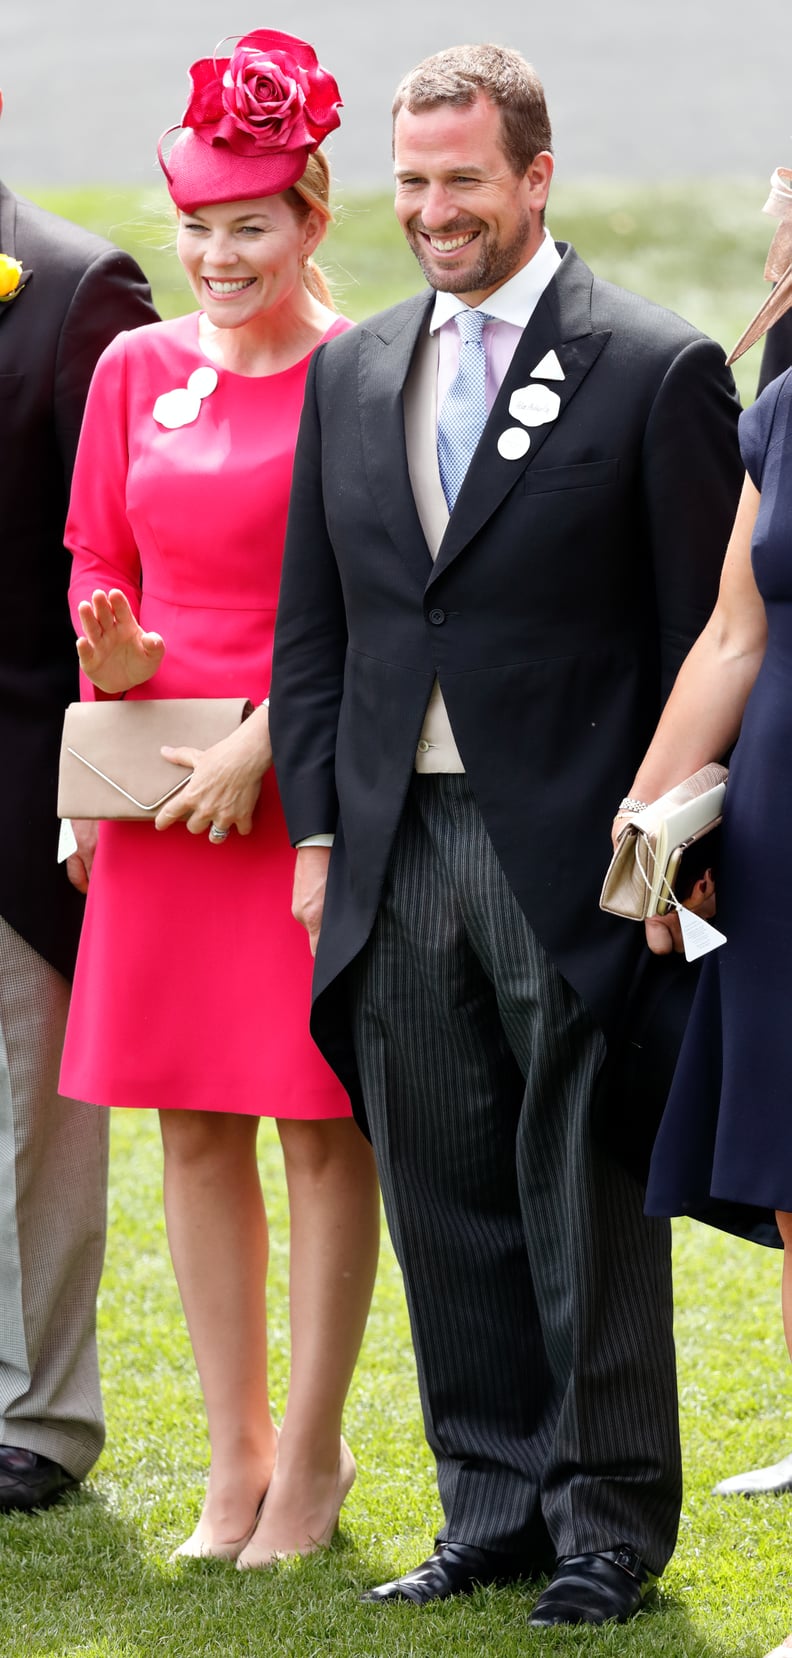 Autumn Phillips at Royal Ascot in June 2018